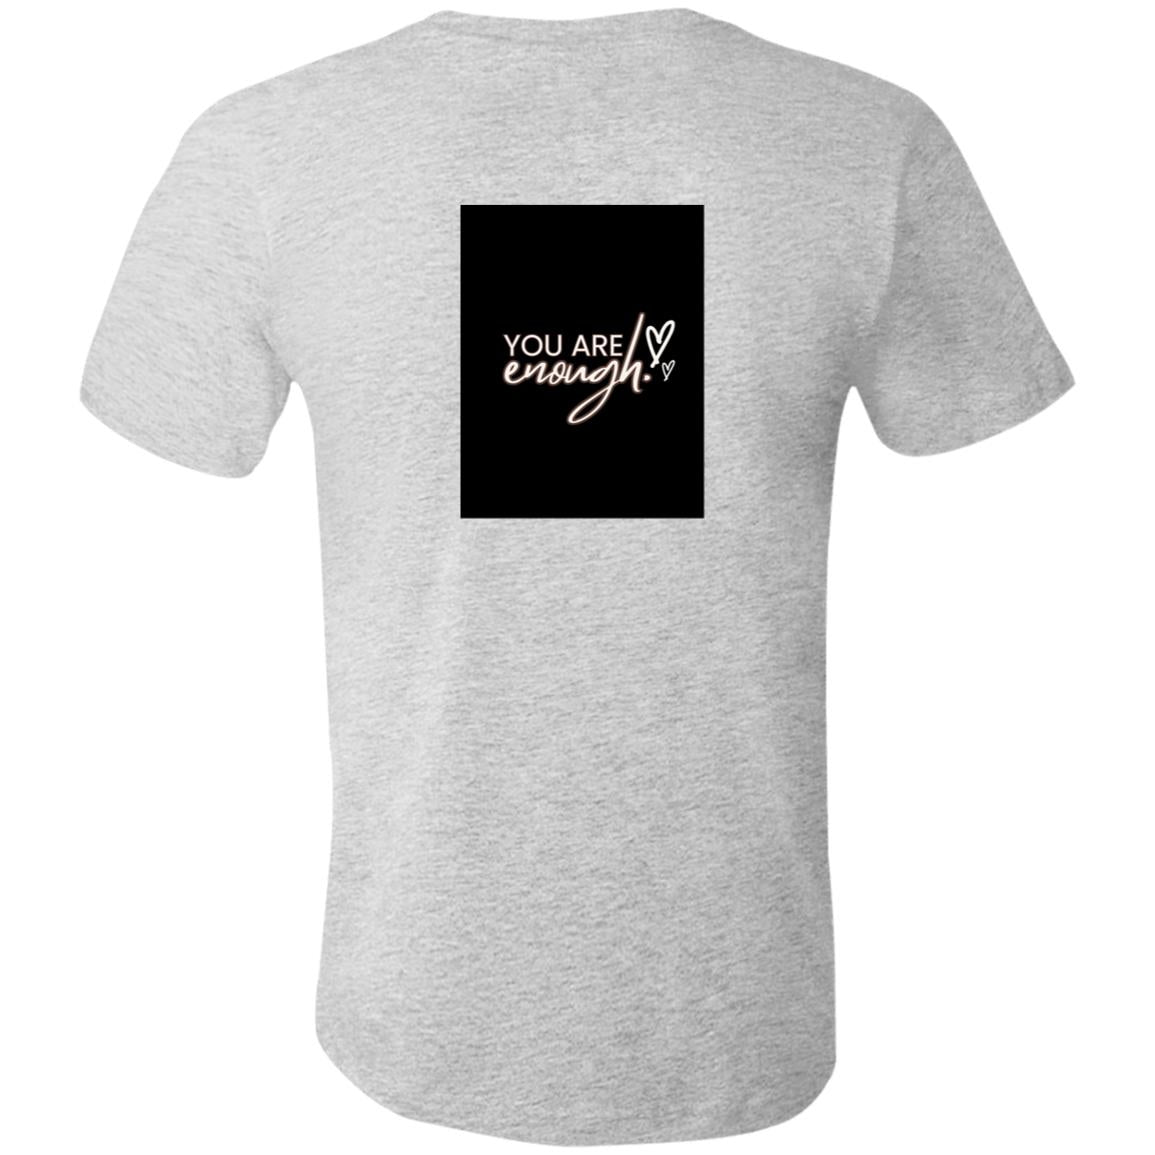 My Love You are Enough (Unisex) Short-Sleeve T-Shirt